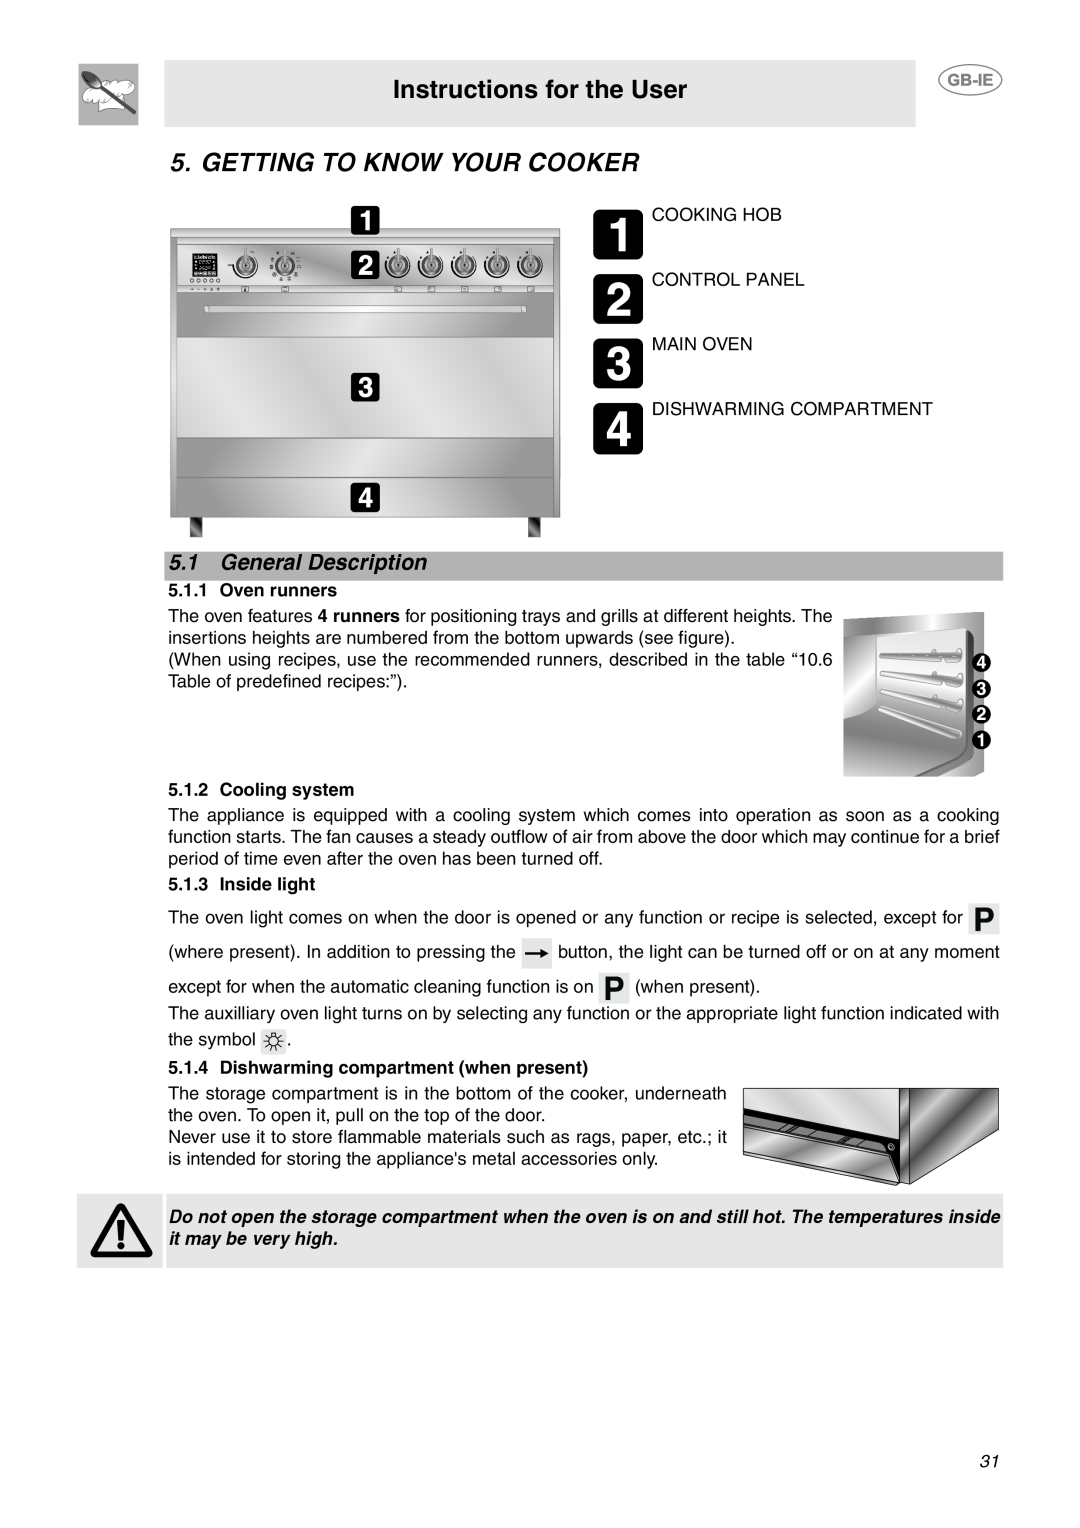 Smeg CE9CMX Instructions for the User, Getting To Know Your Cooker, General Description, Oven runners, Cooling system 